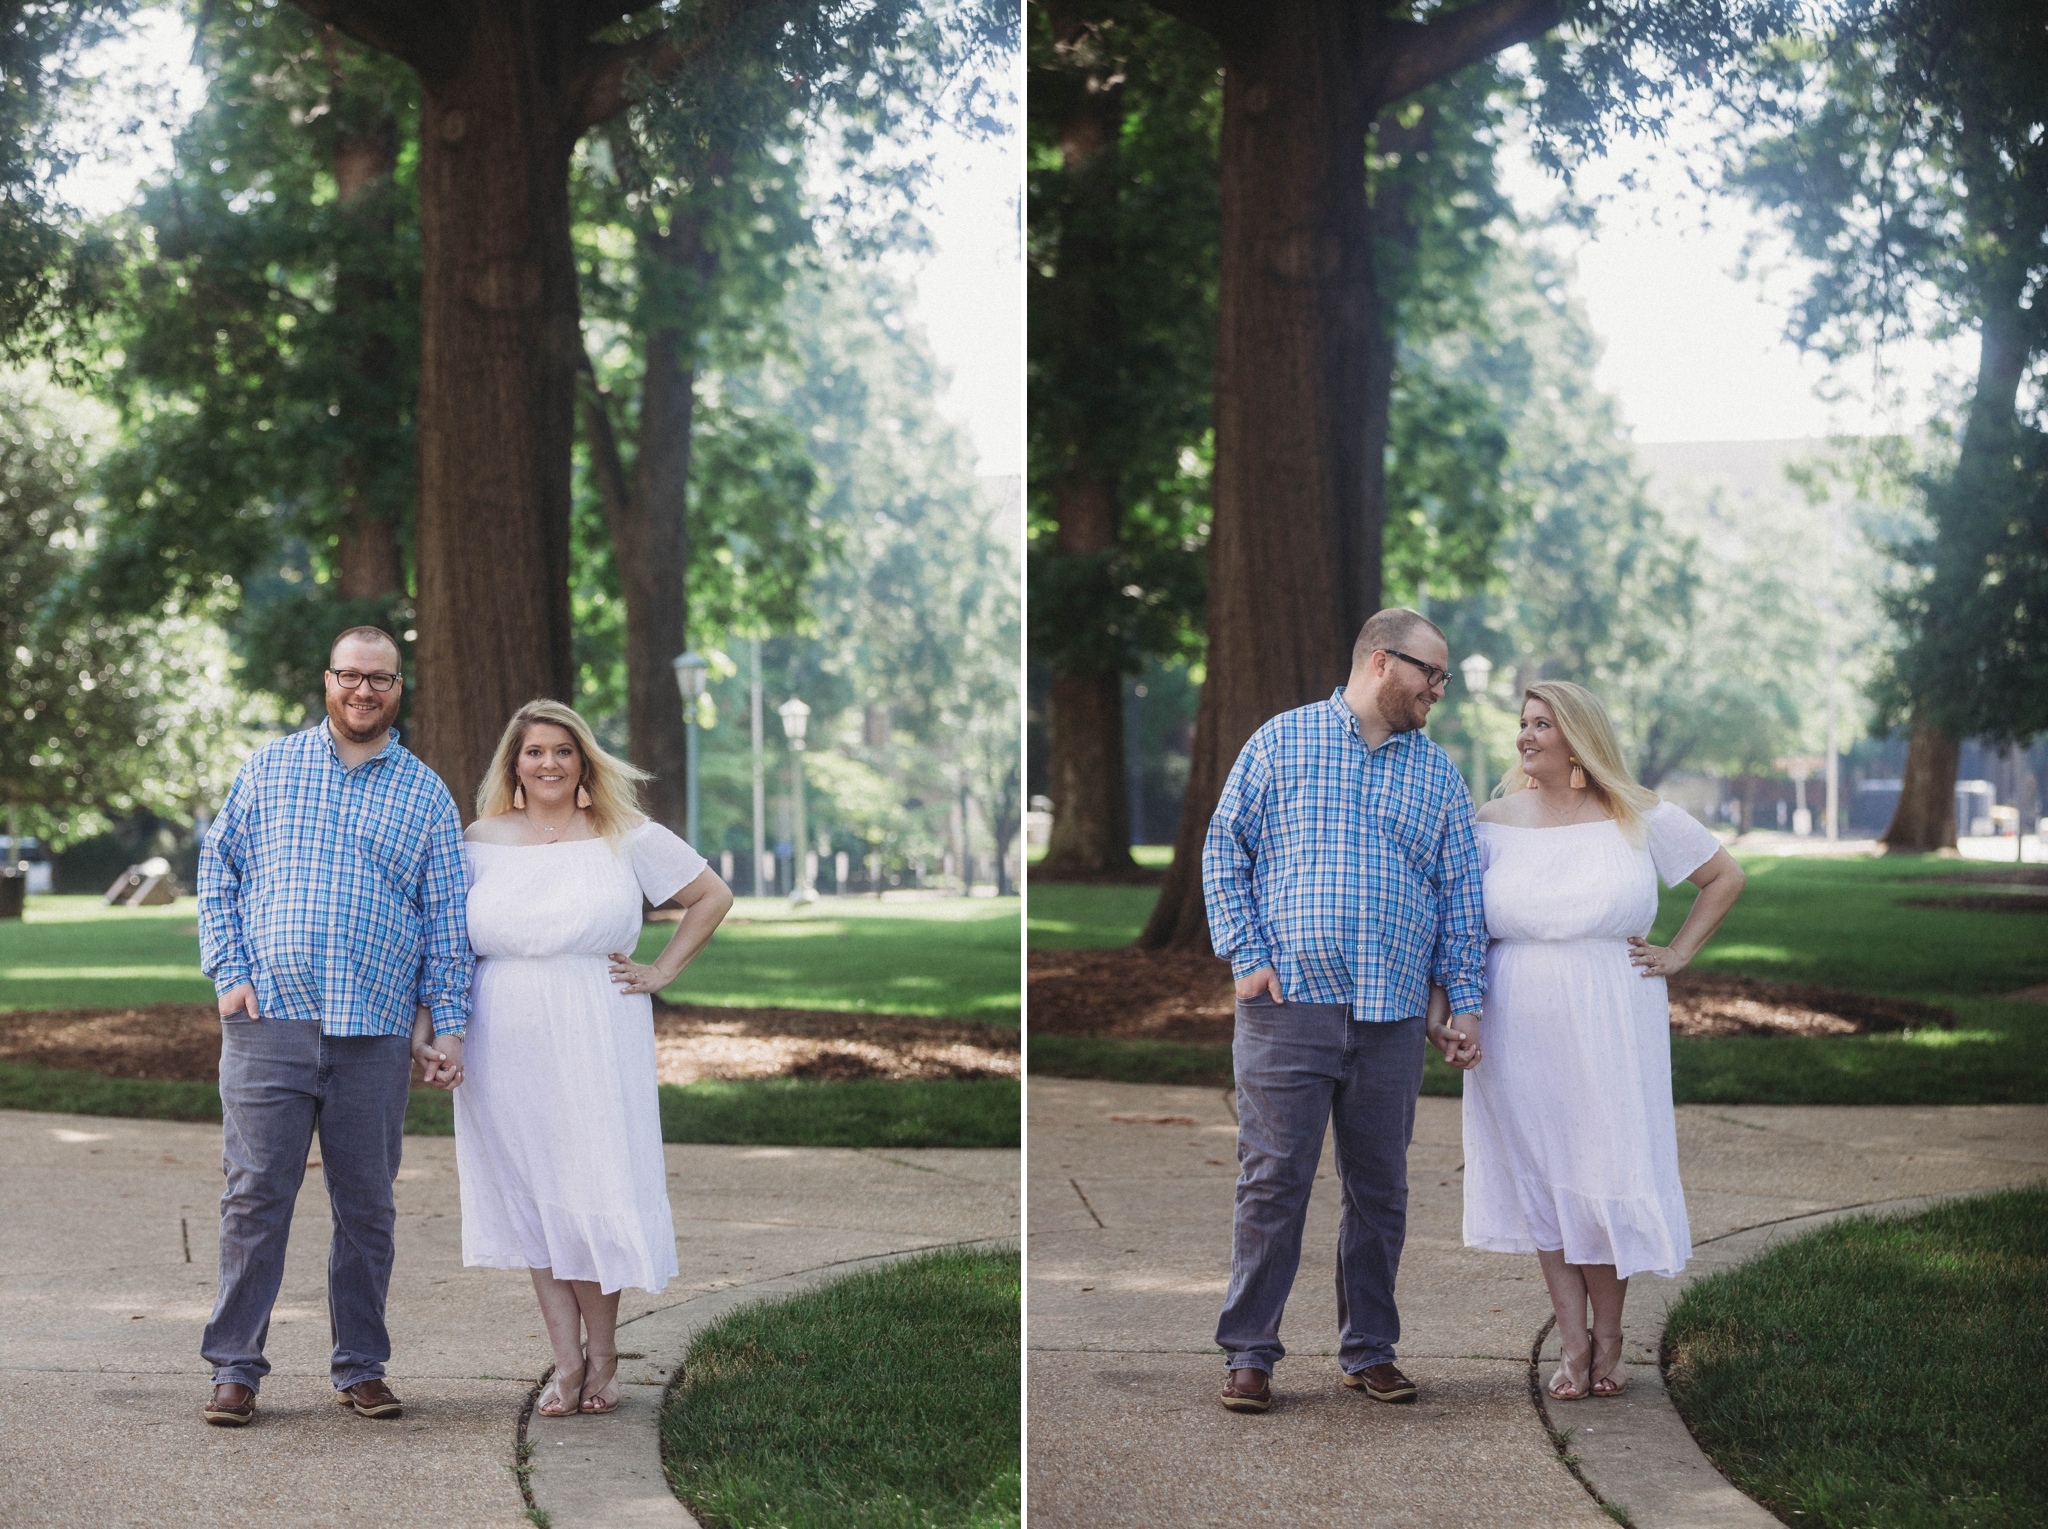 Brittany + Douglas - Downtown Raleigh Engagement Photography Session - Raleigh Wedding Photographer 8.jpg